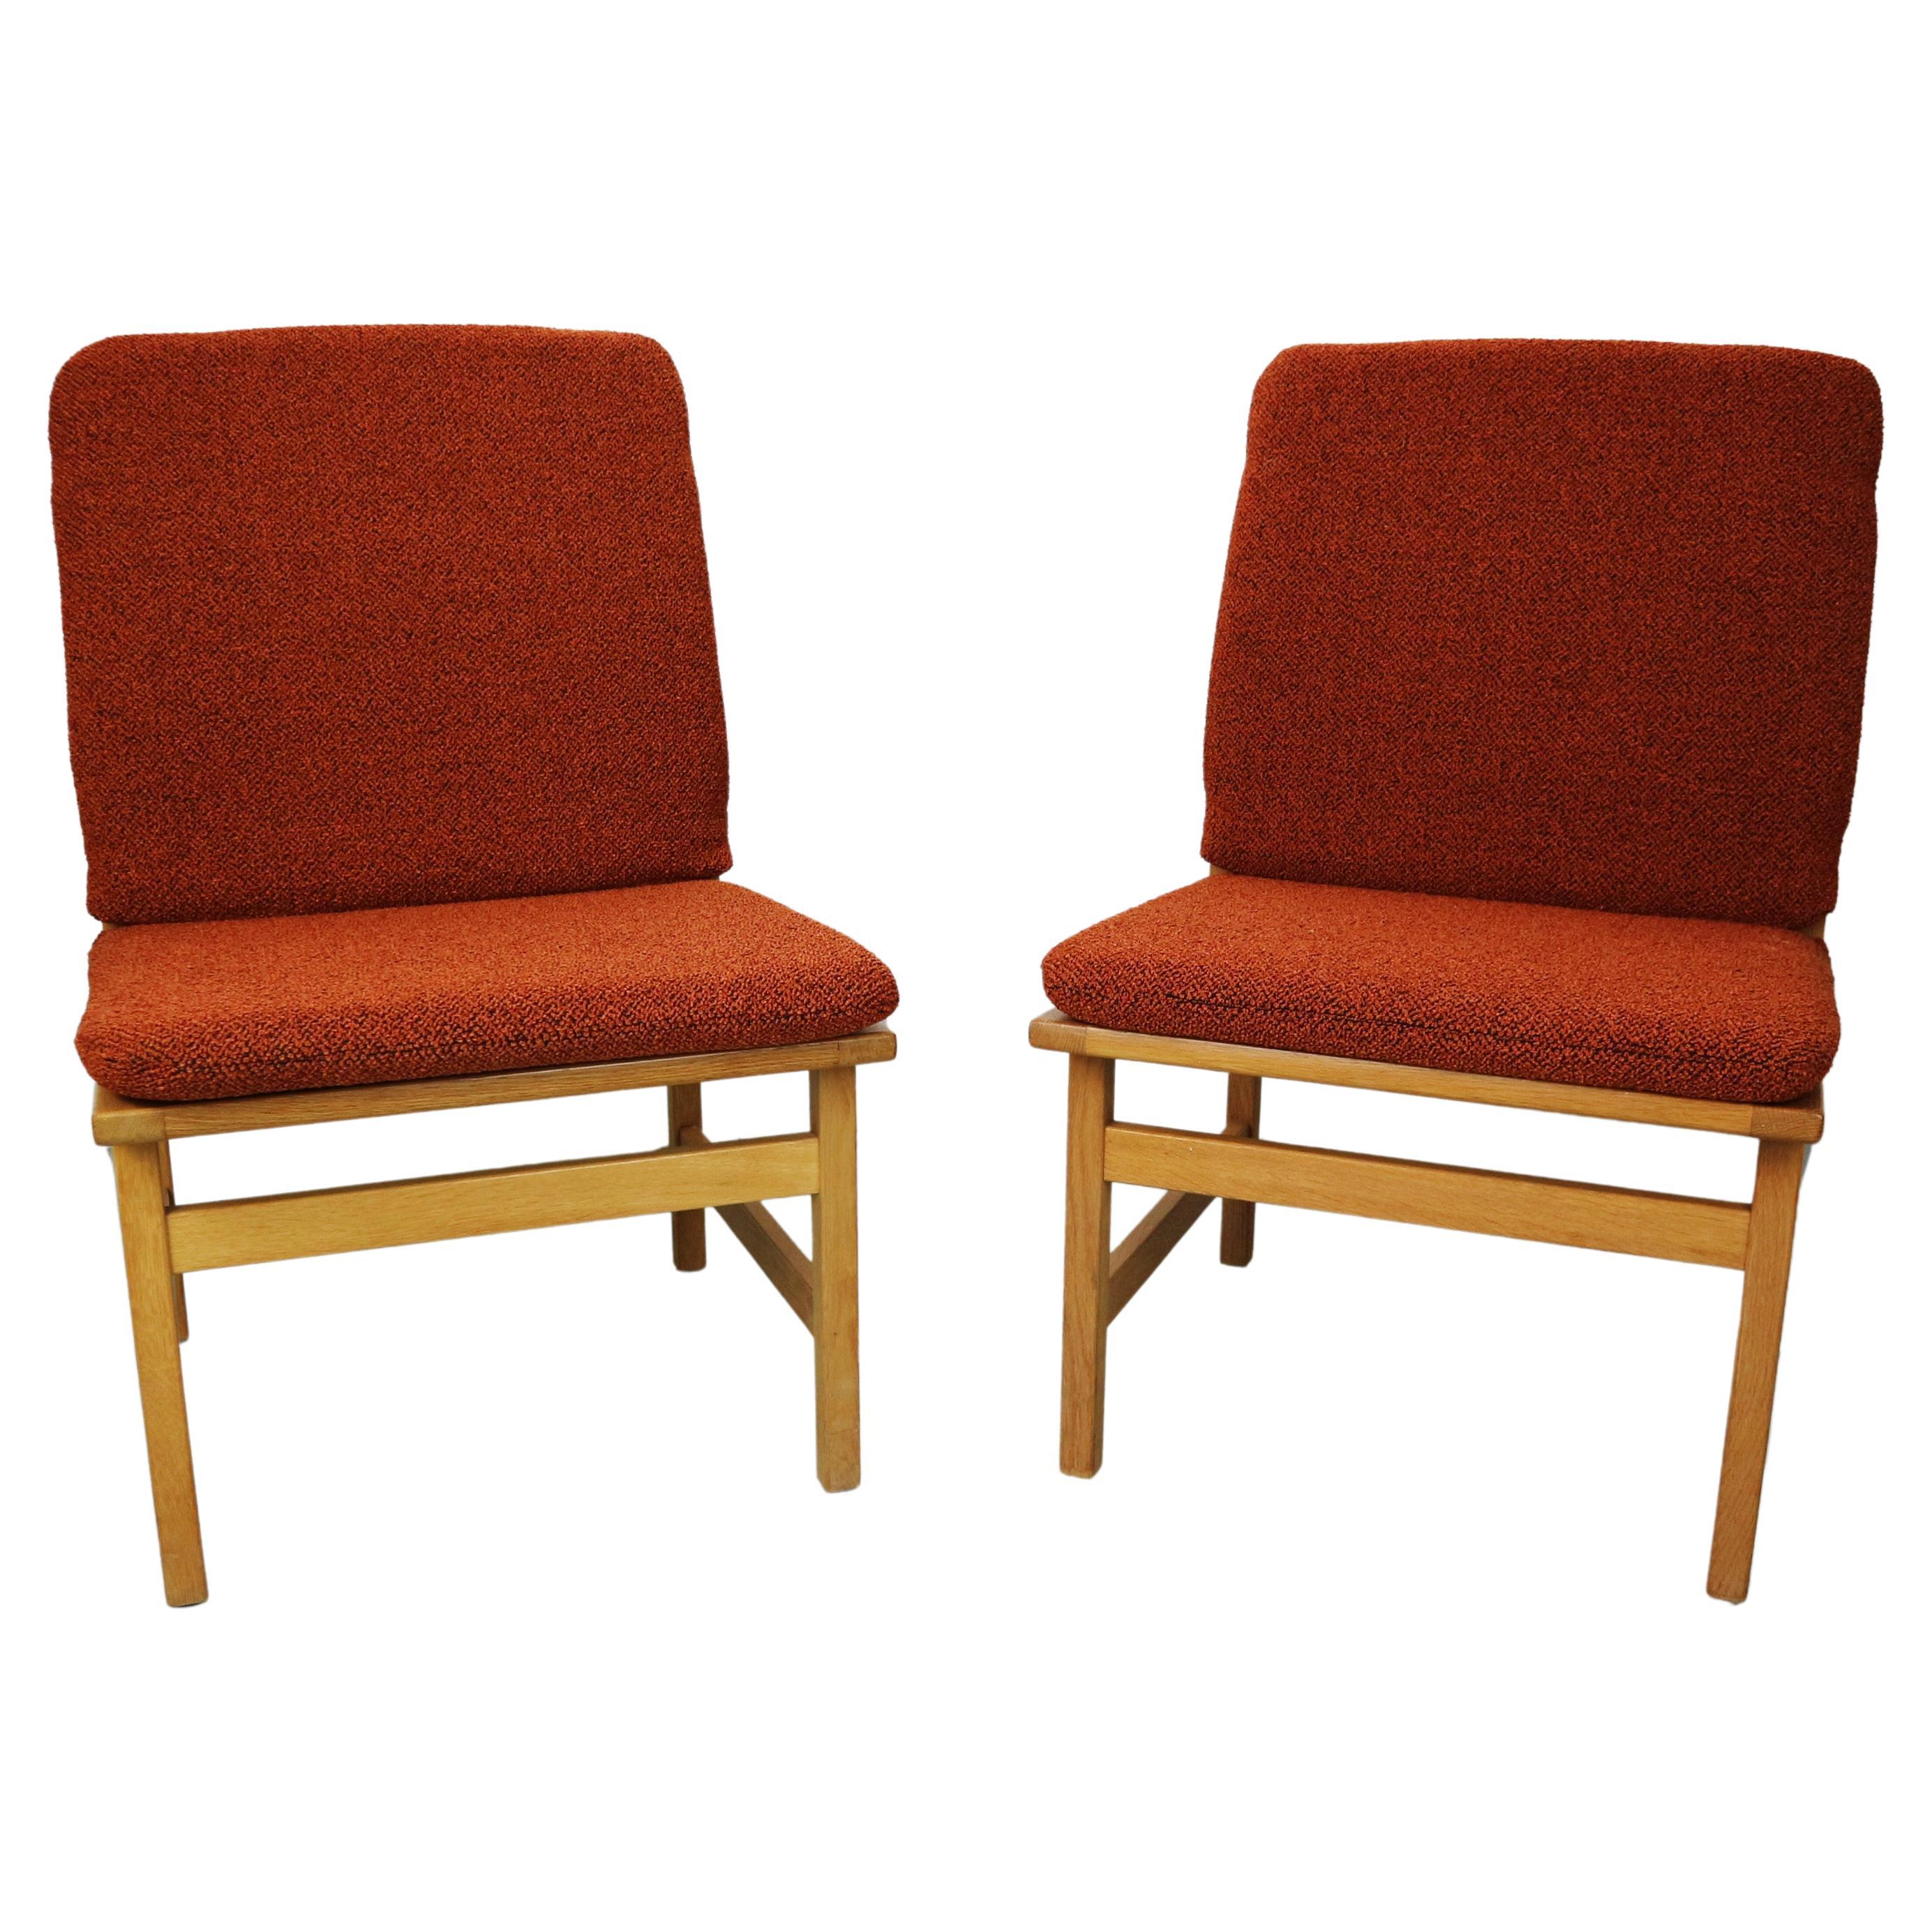 Borge Mogenson set of side chairs, model 3232   For Sale